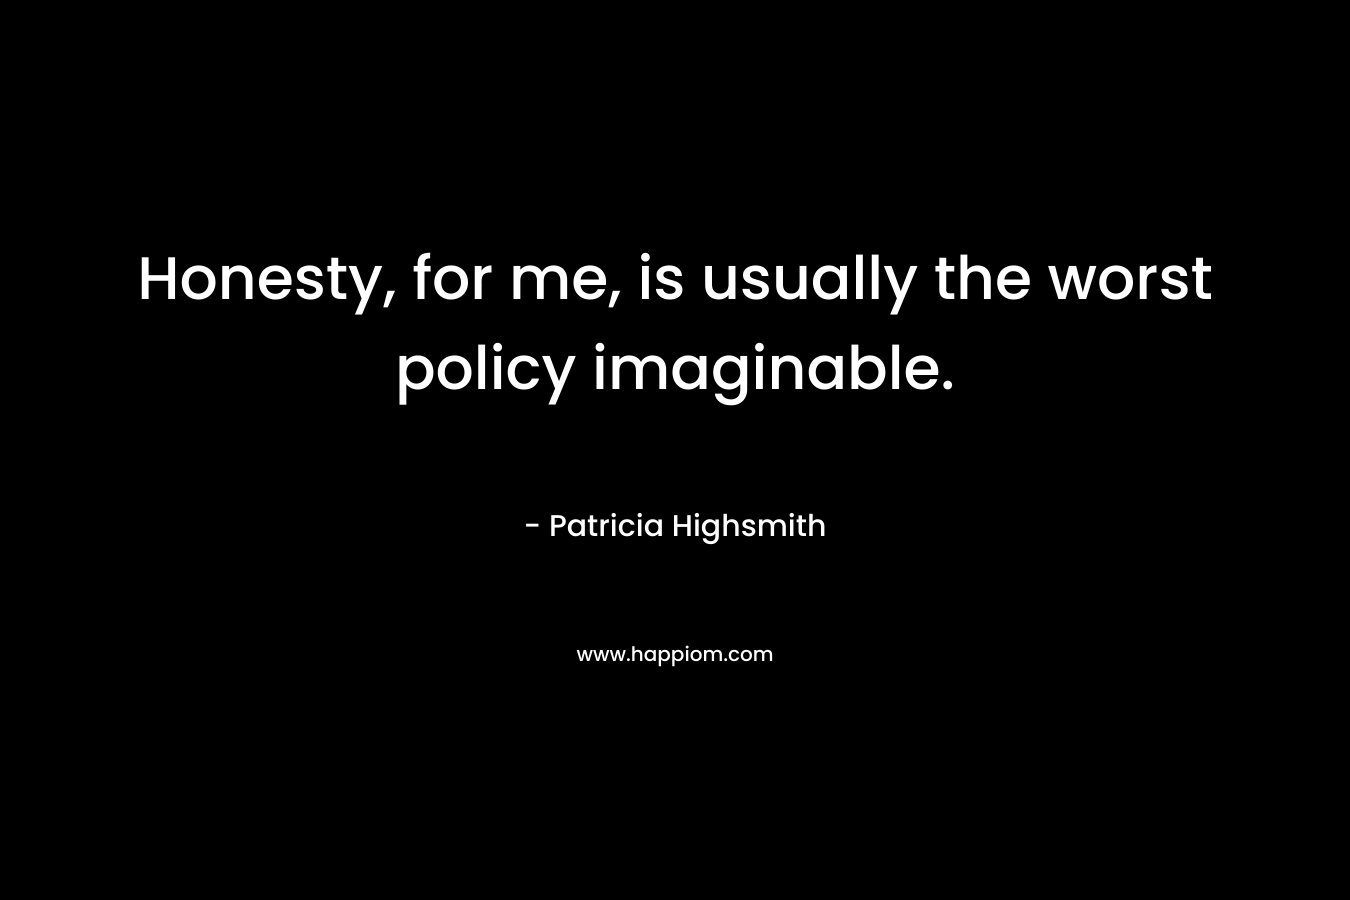 Honesty, for me, is usually the worst policy imaginable. – Patricia Highsmith